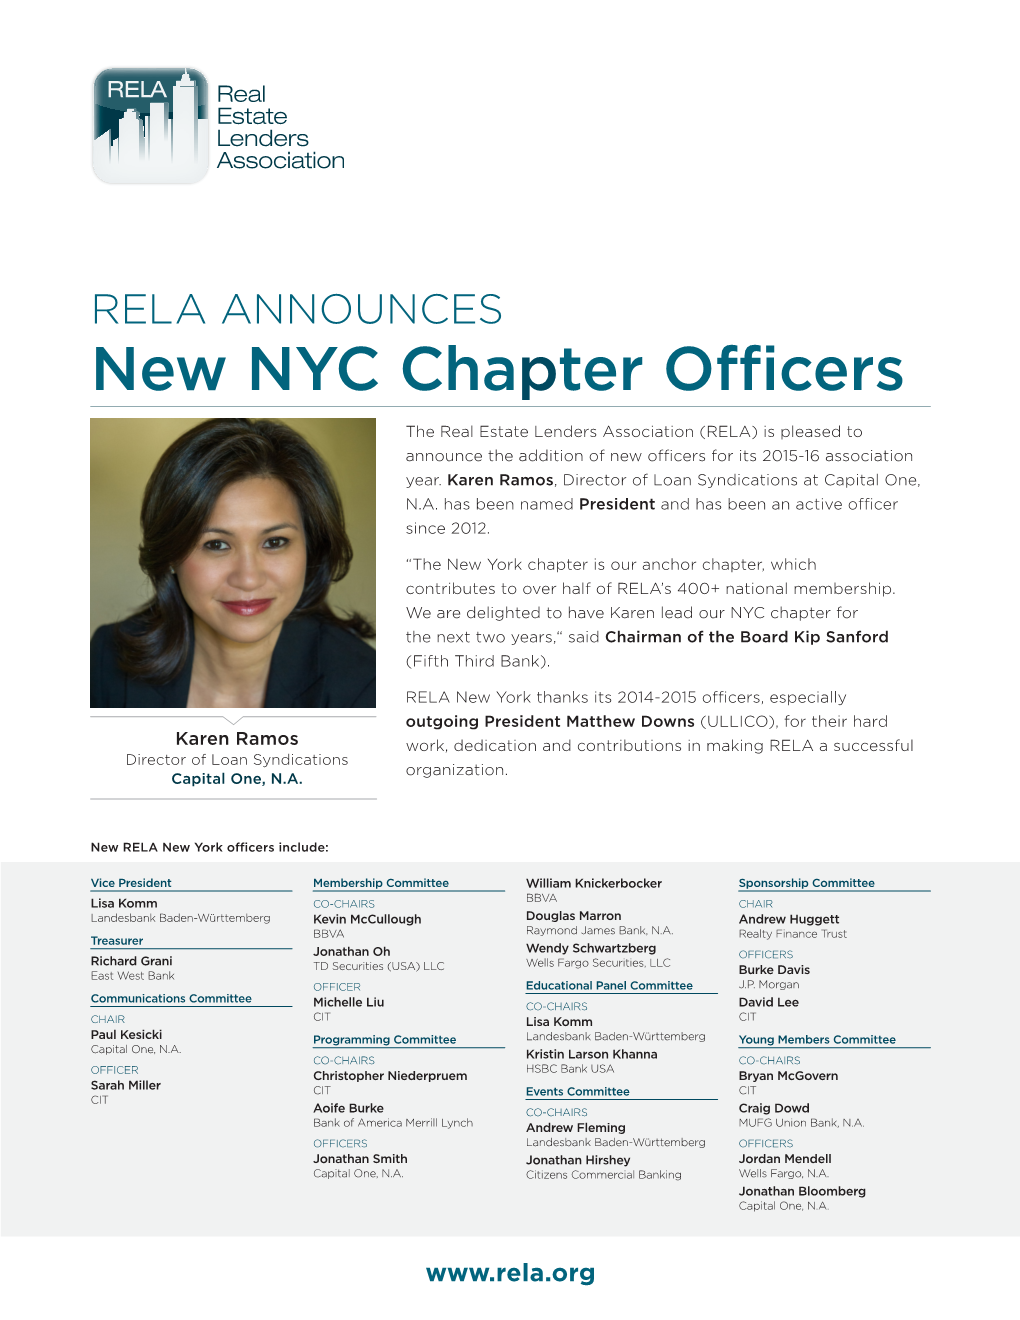 New NYC Chapter Officers